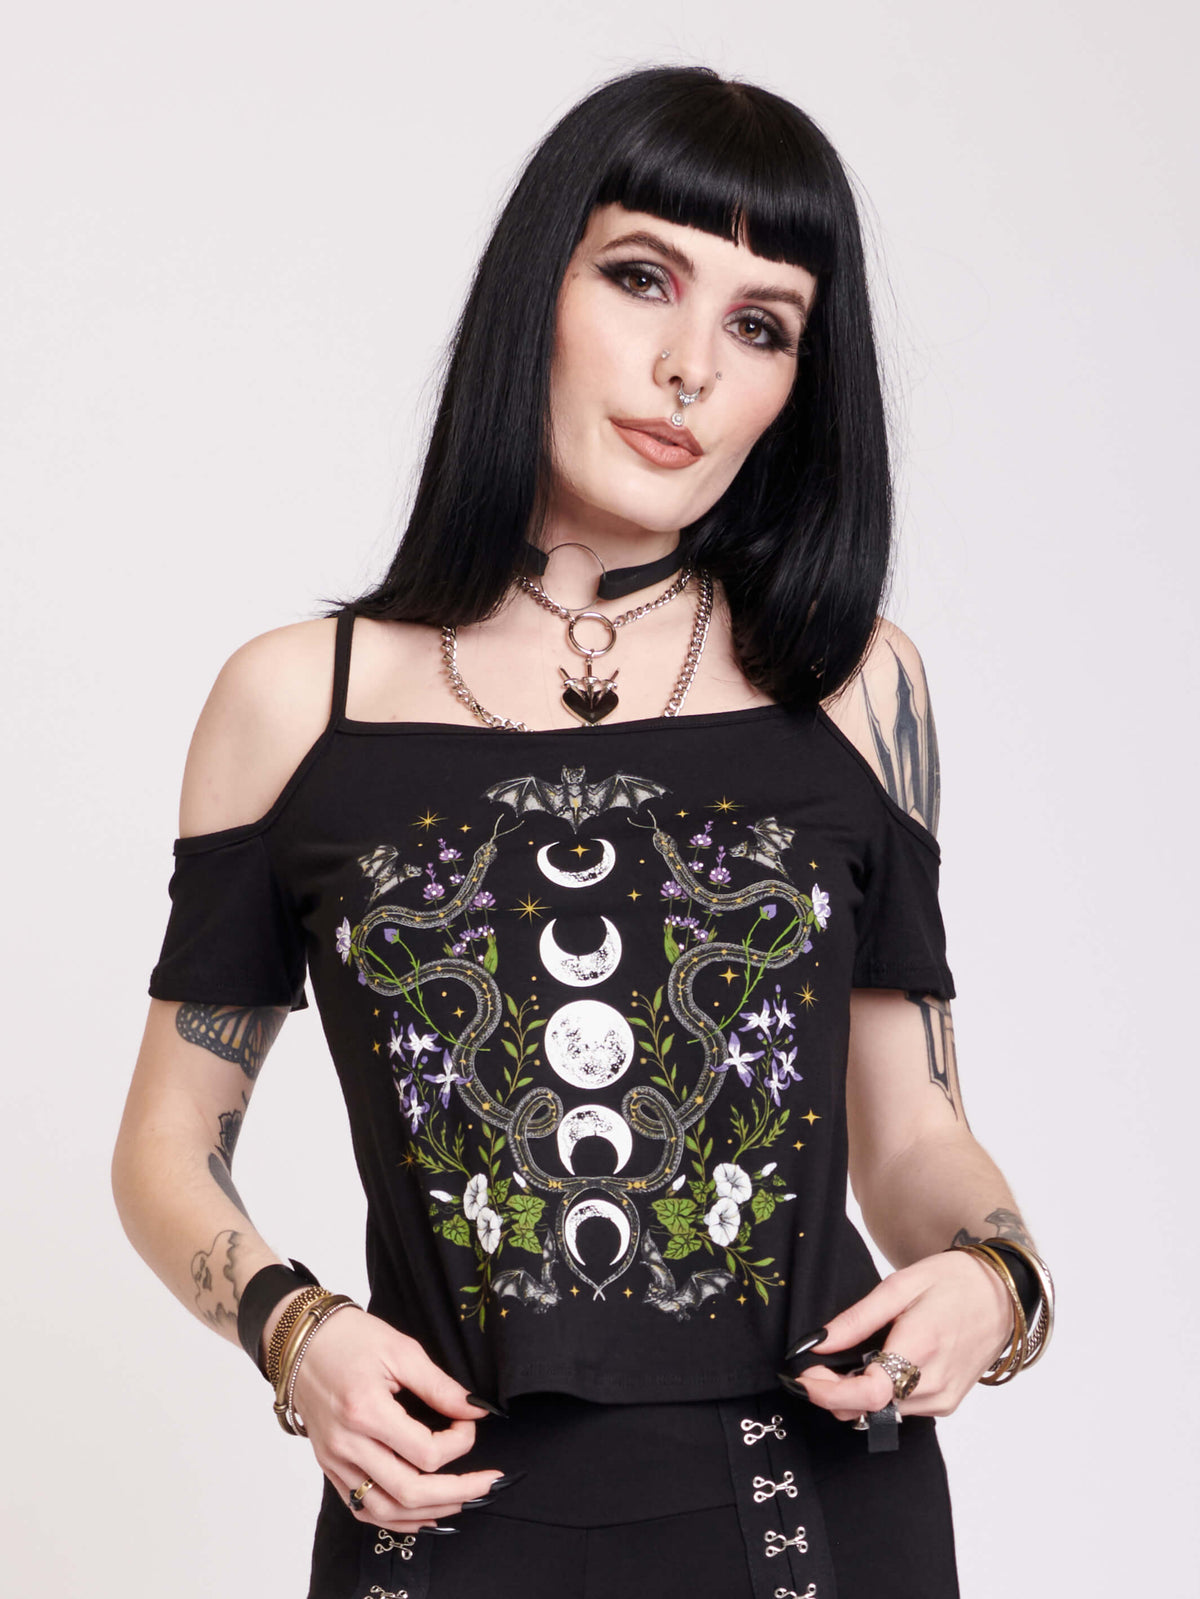 Off shoulder tank with snakes and moon phases